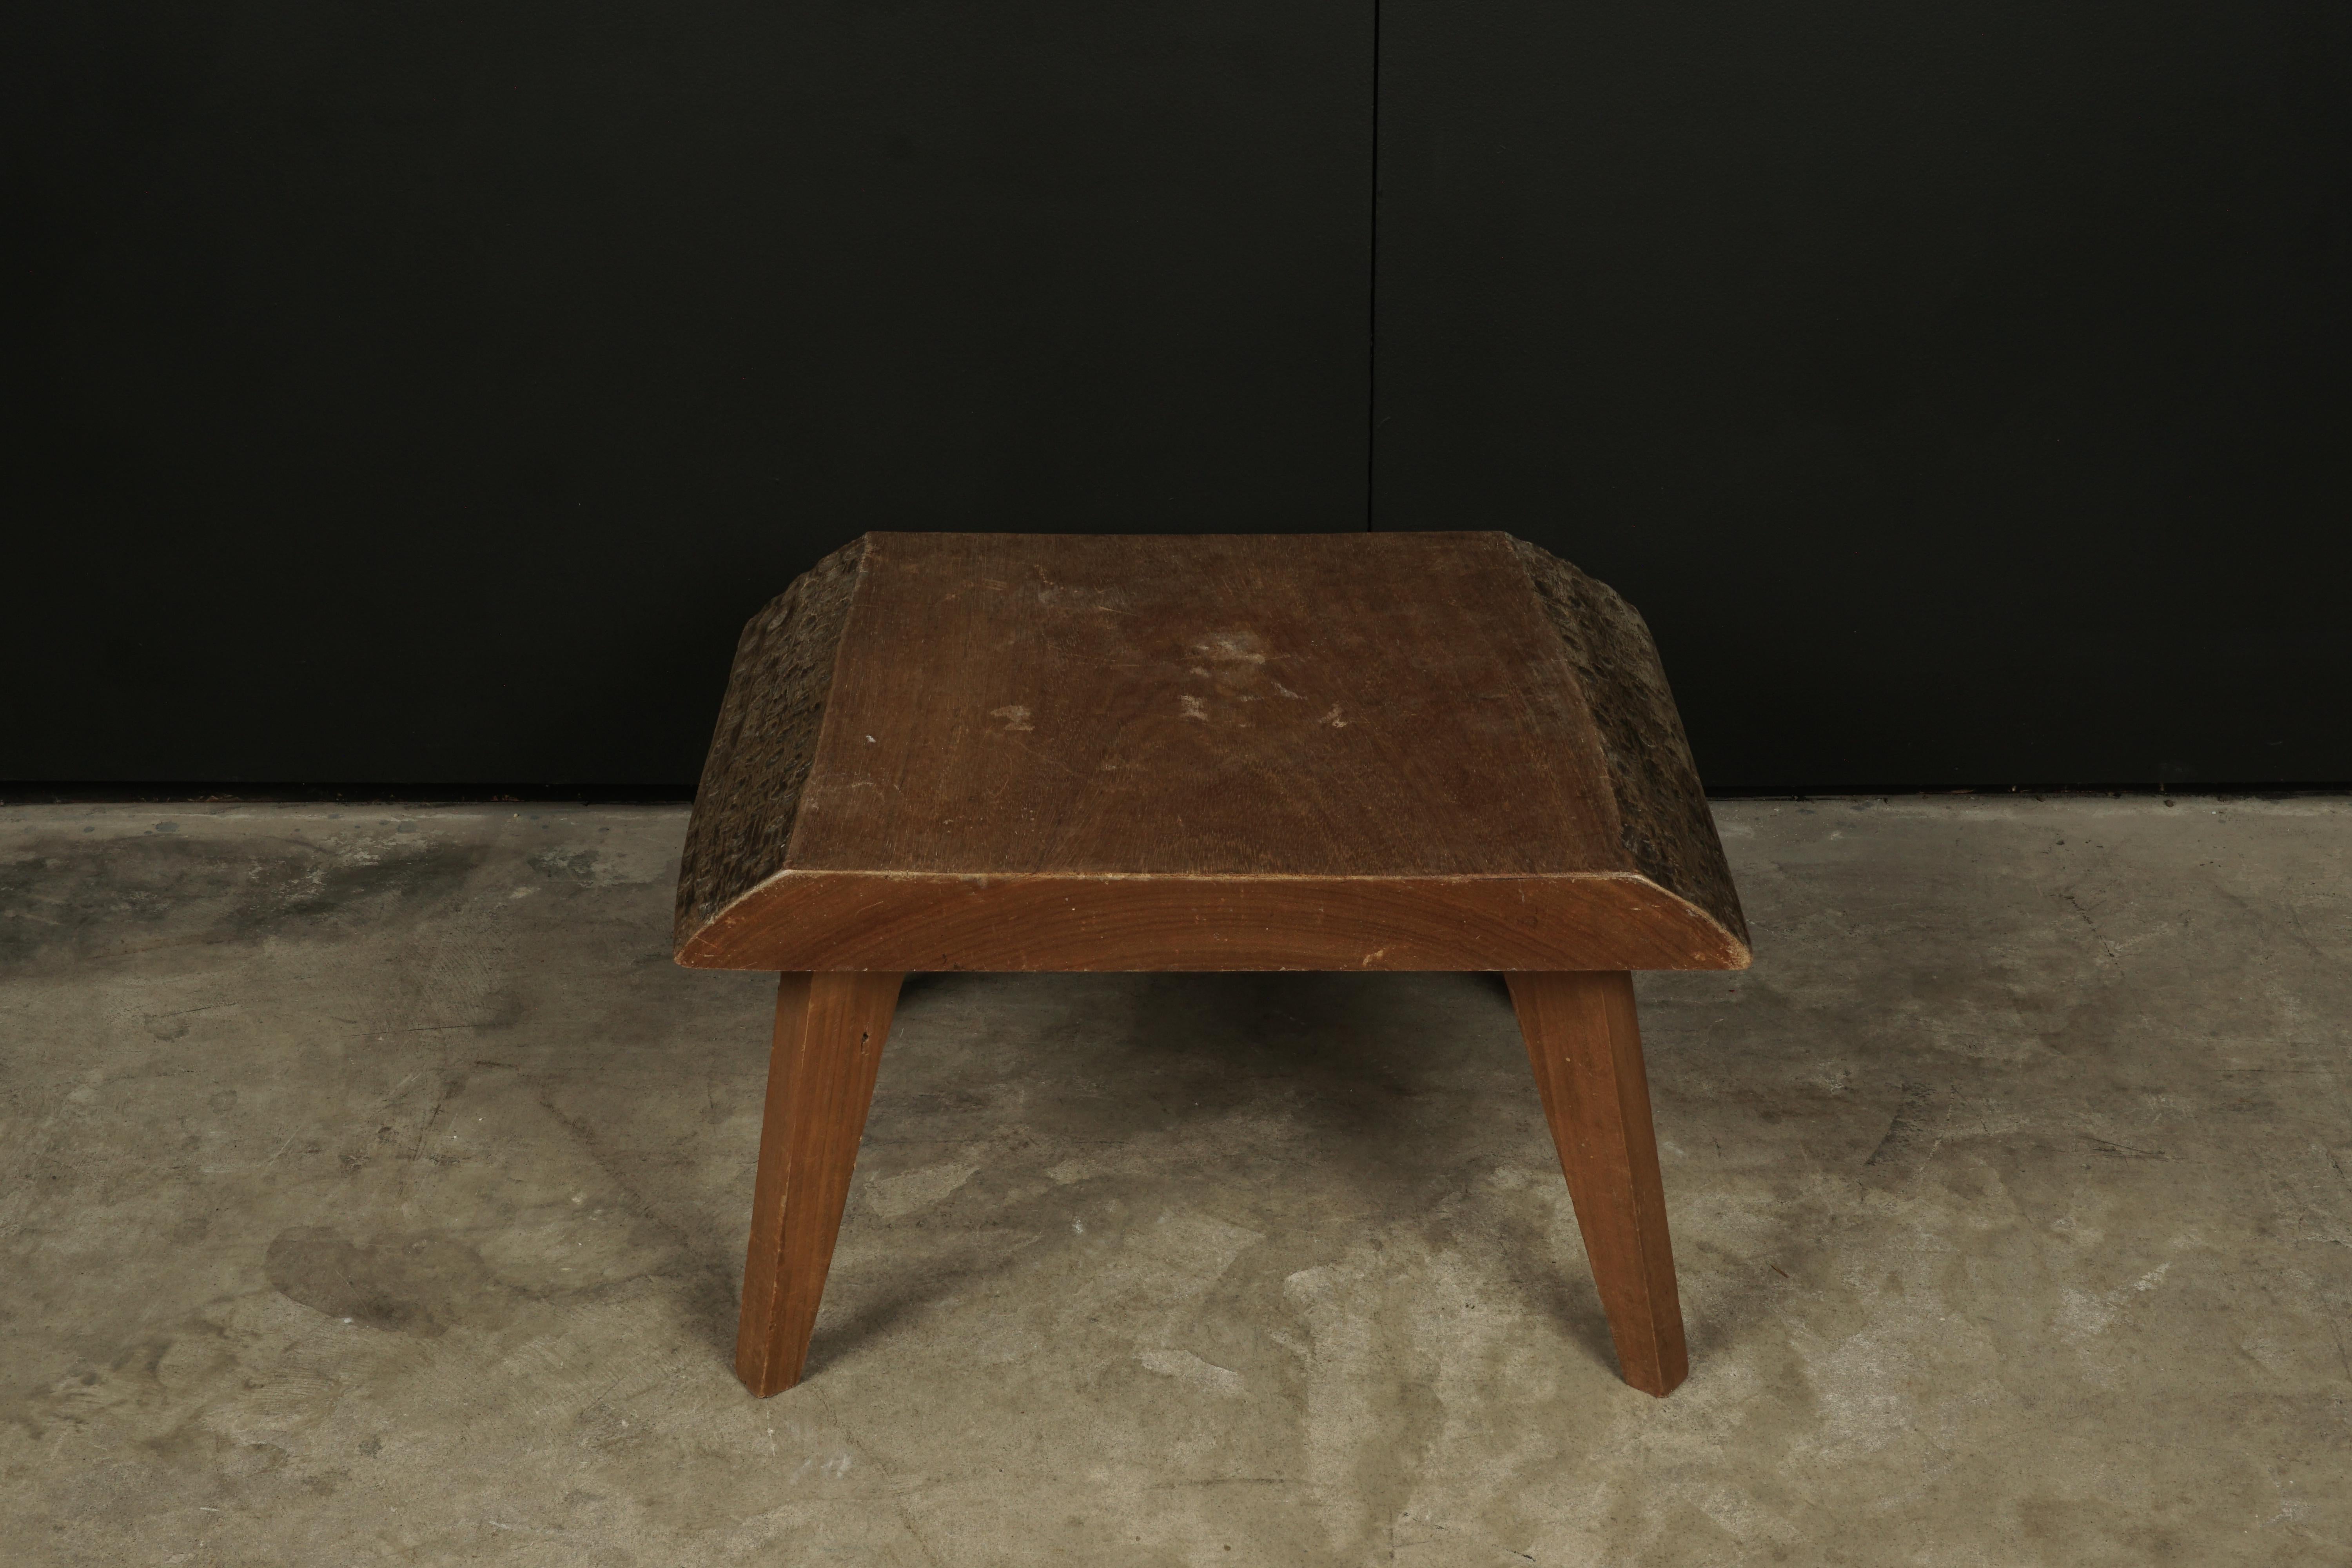 Low table in the style of Atelier Marolles, France, 1960s. Solid elm construction with light wear and patina.